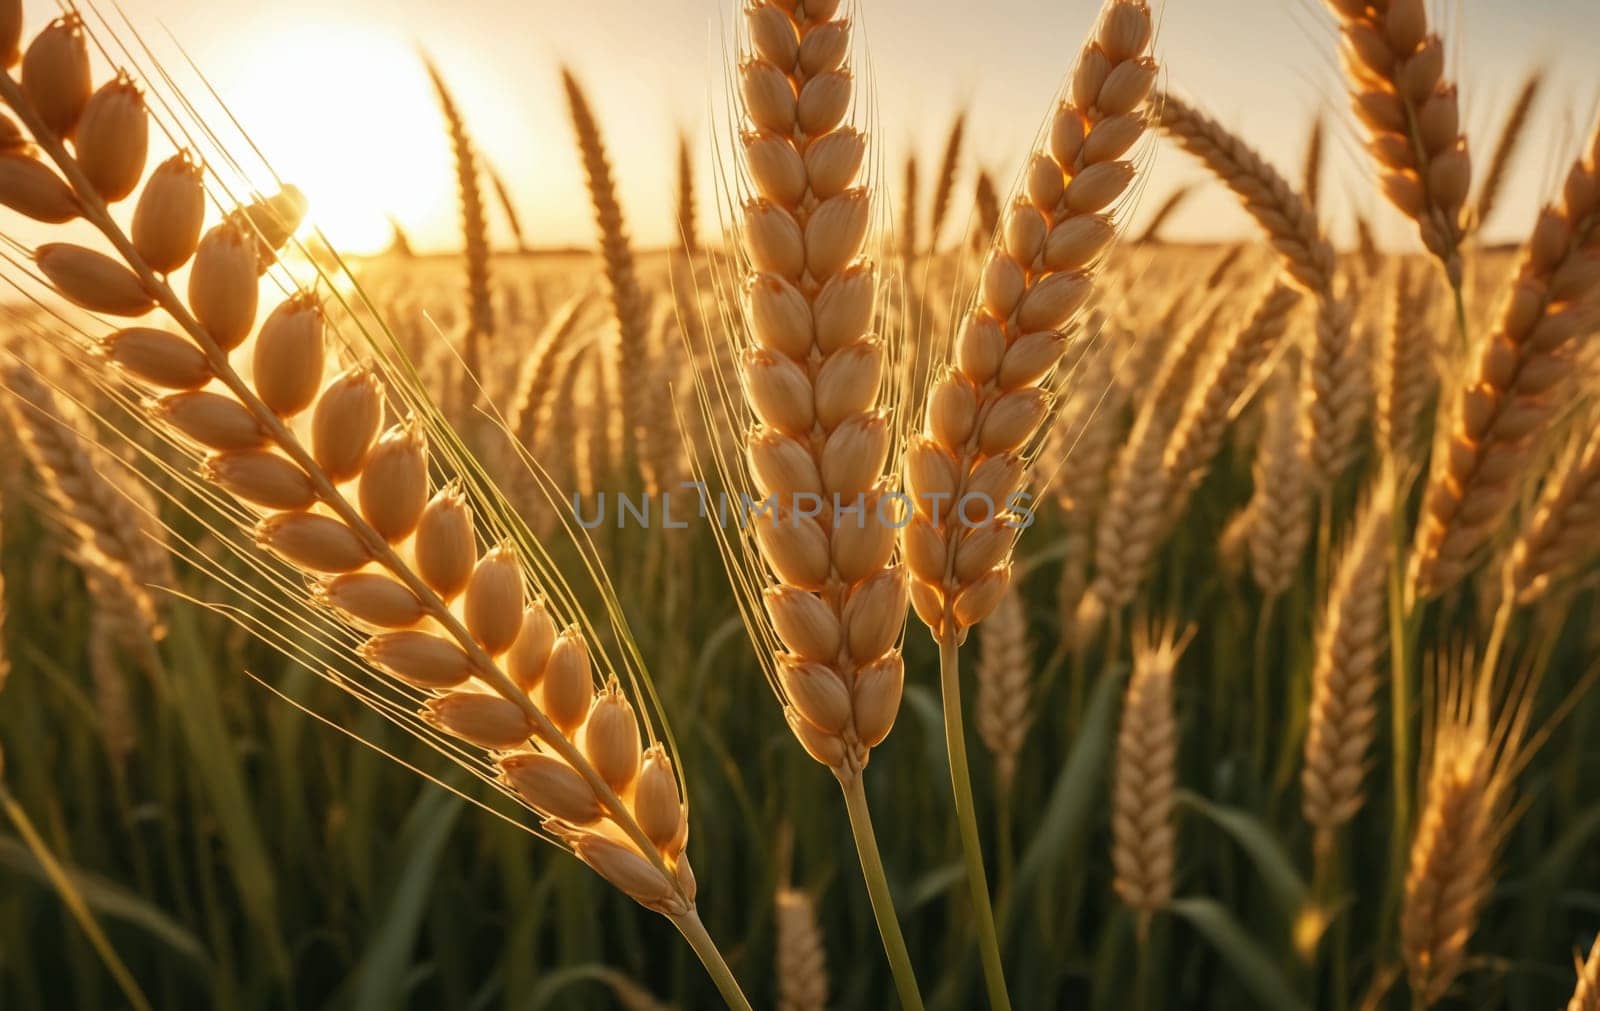 Wheat ears in the field at sunset. Close-up